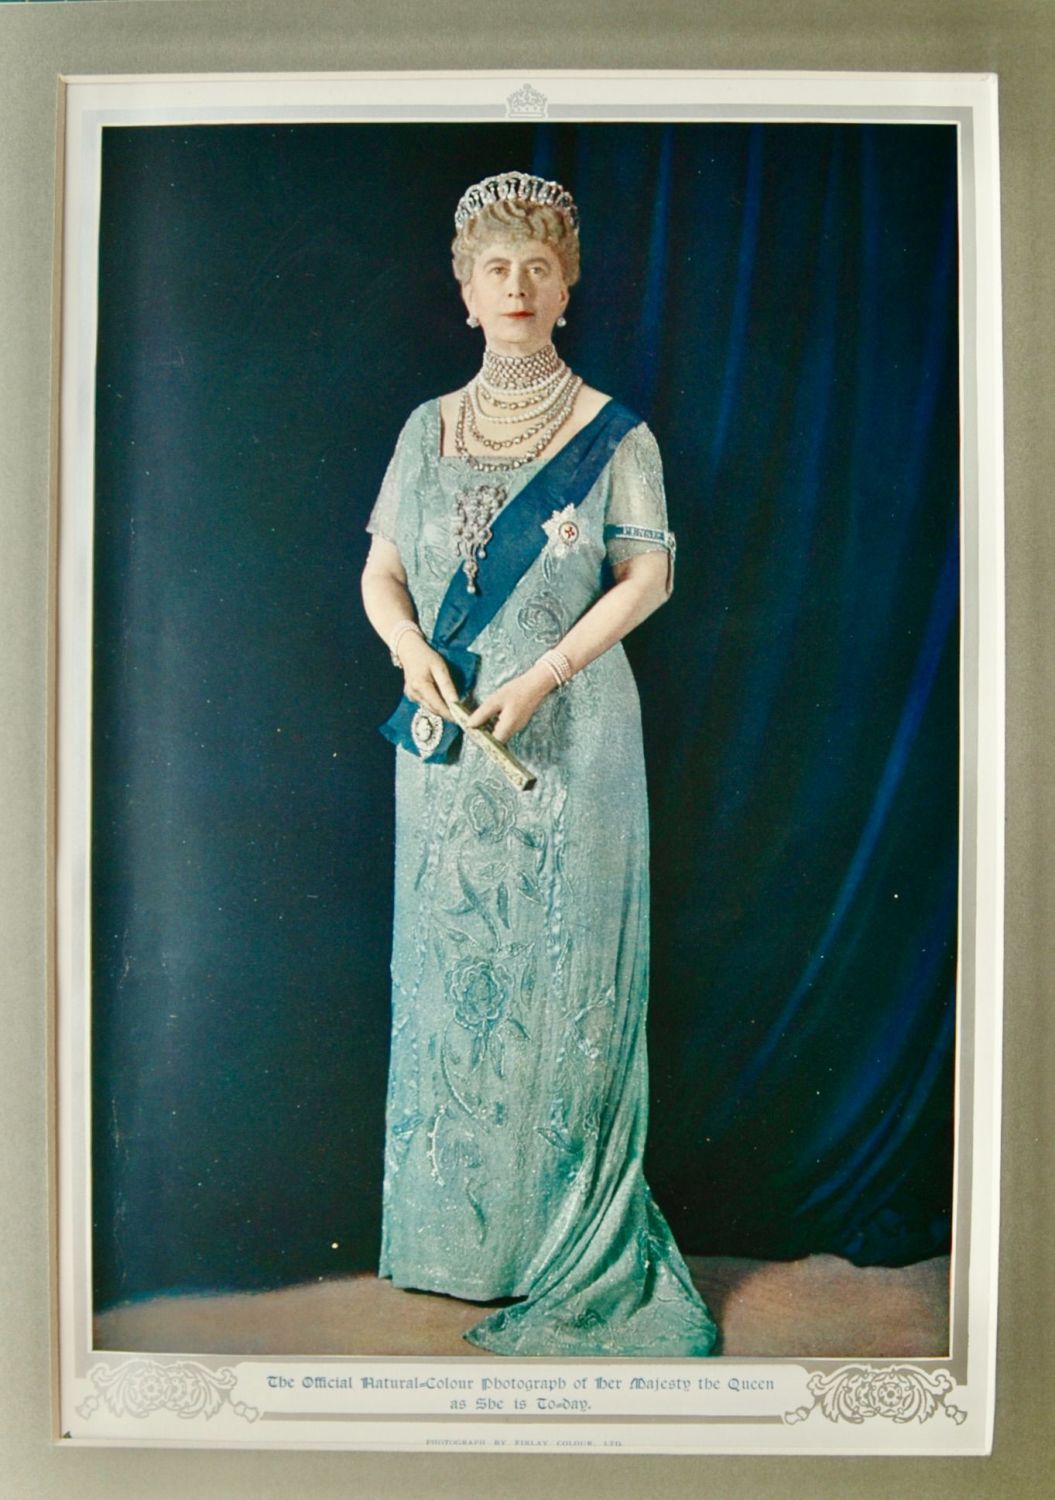 The Official Natural-Colour Photograph of Her Majesty the Queen as She is T